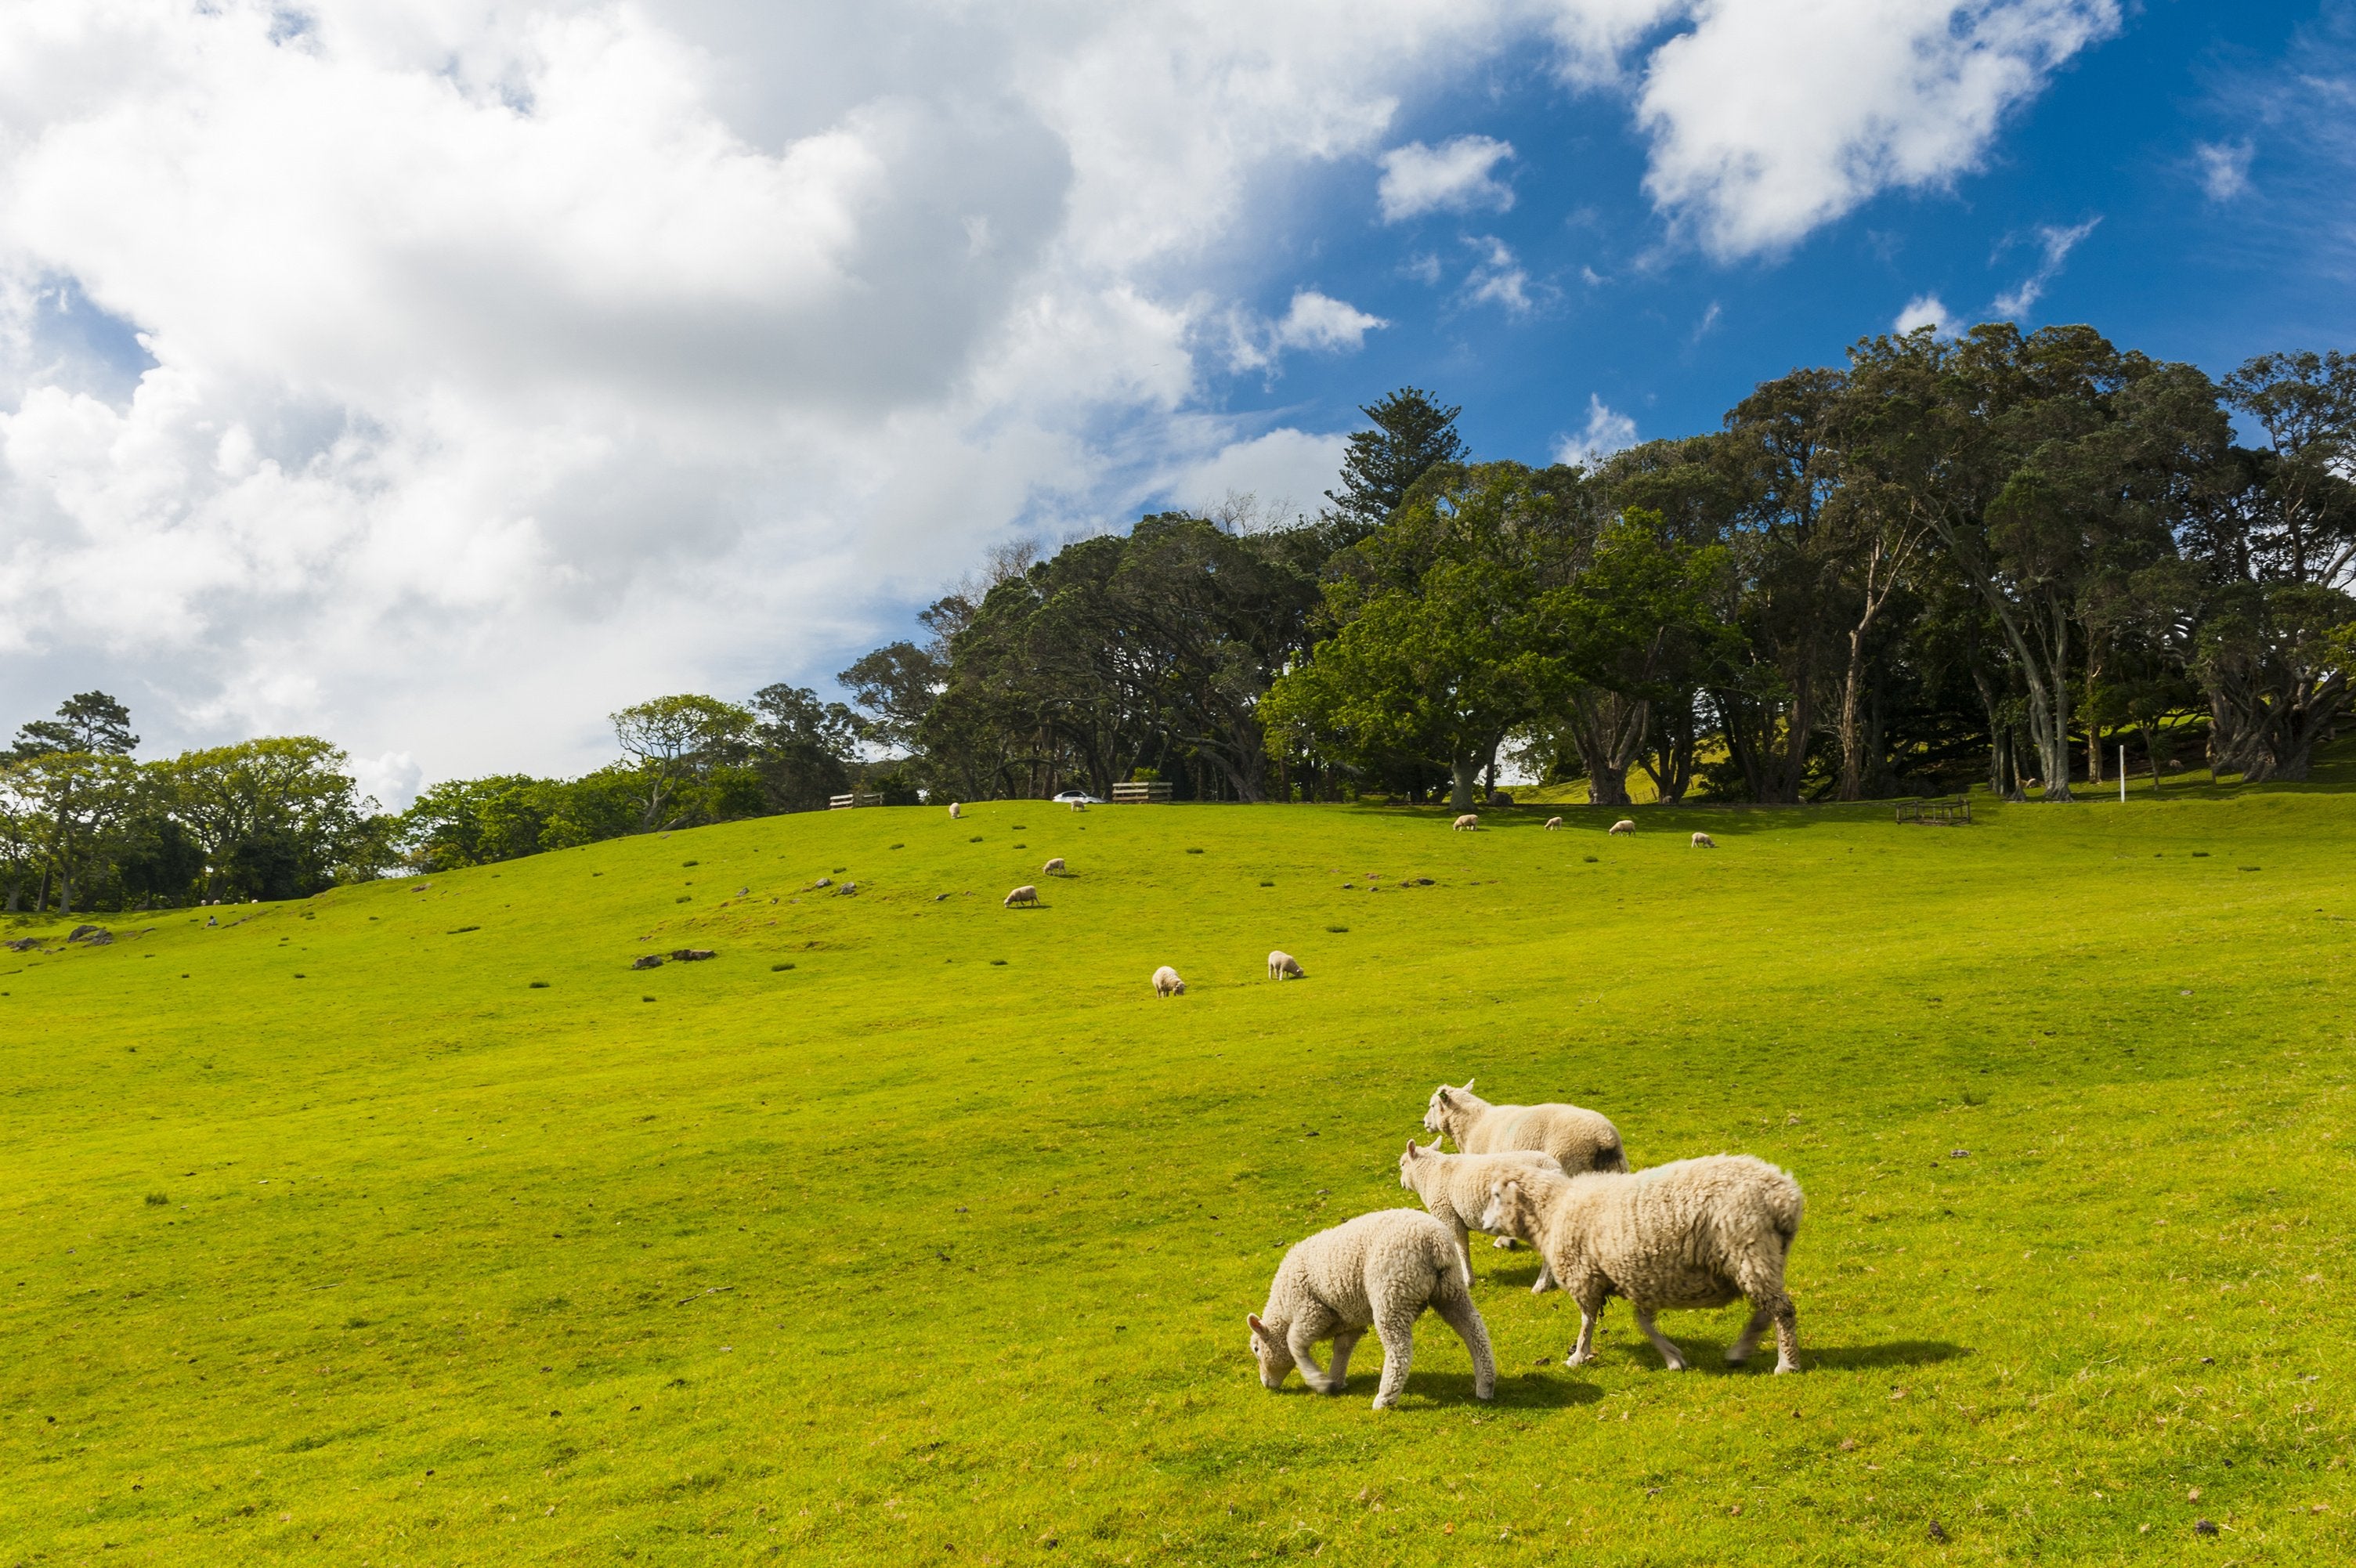 Several sheep grazing on a grassy field with trees, clouds, and blue sky in the background. 